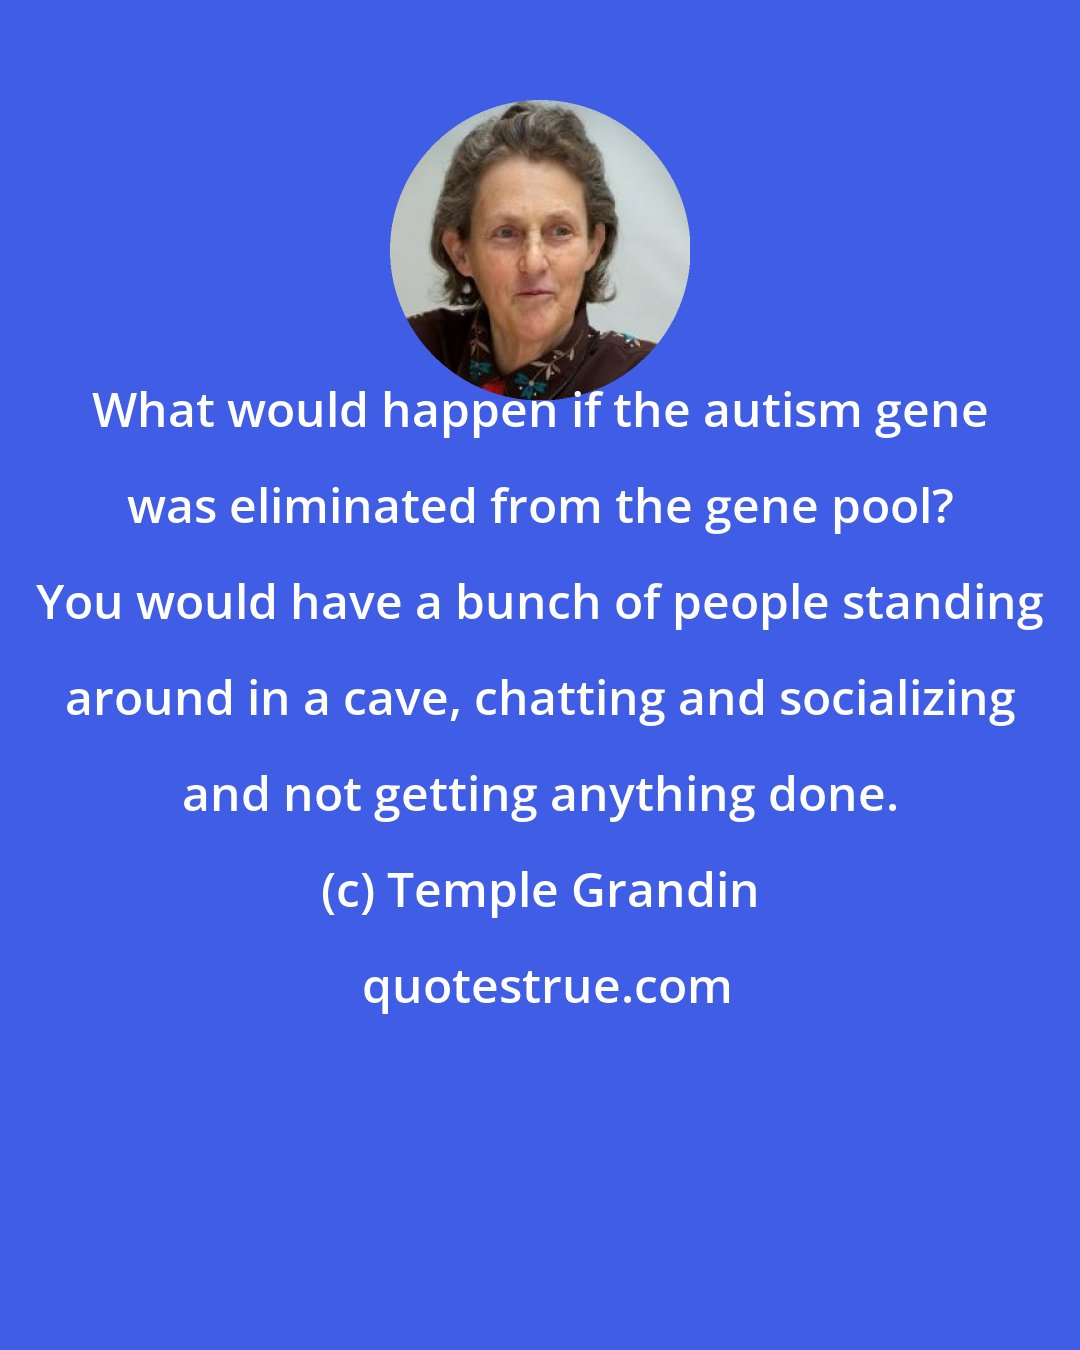 Temple Grandin: What would happen if the autism gene was eliminated from the gene pool? You would have a bunch of people standing around in a cave, chatting and socializing and not getting anything done.